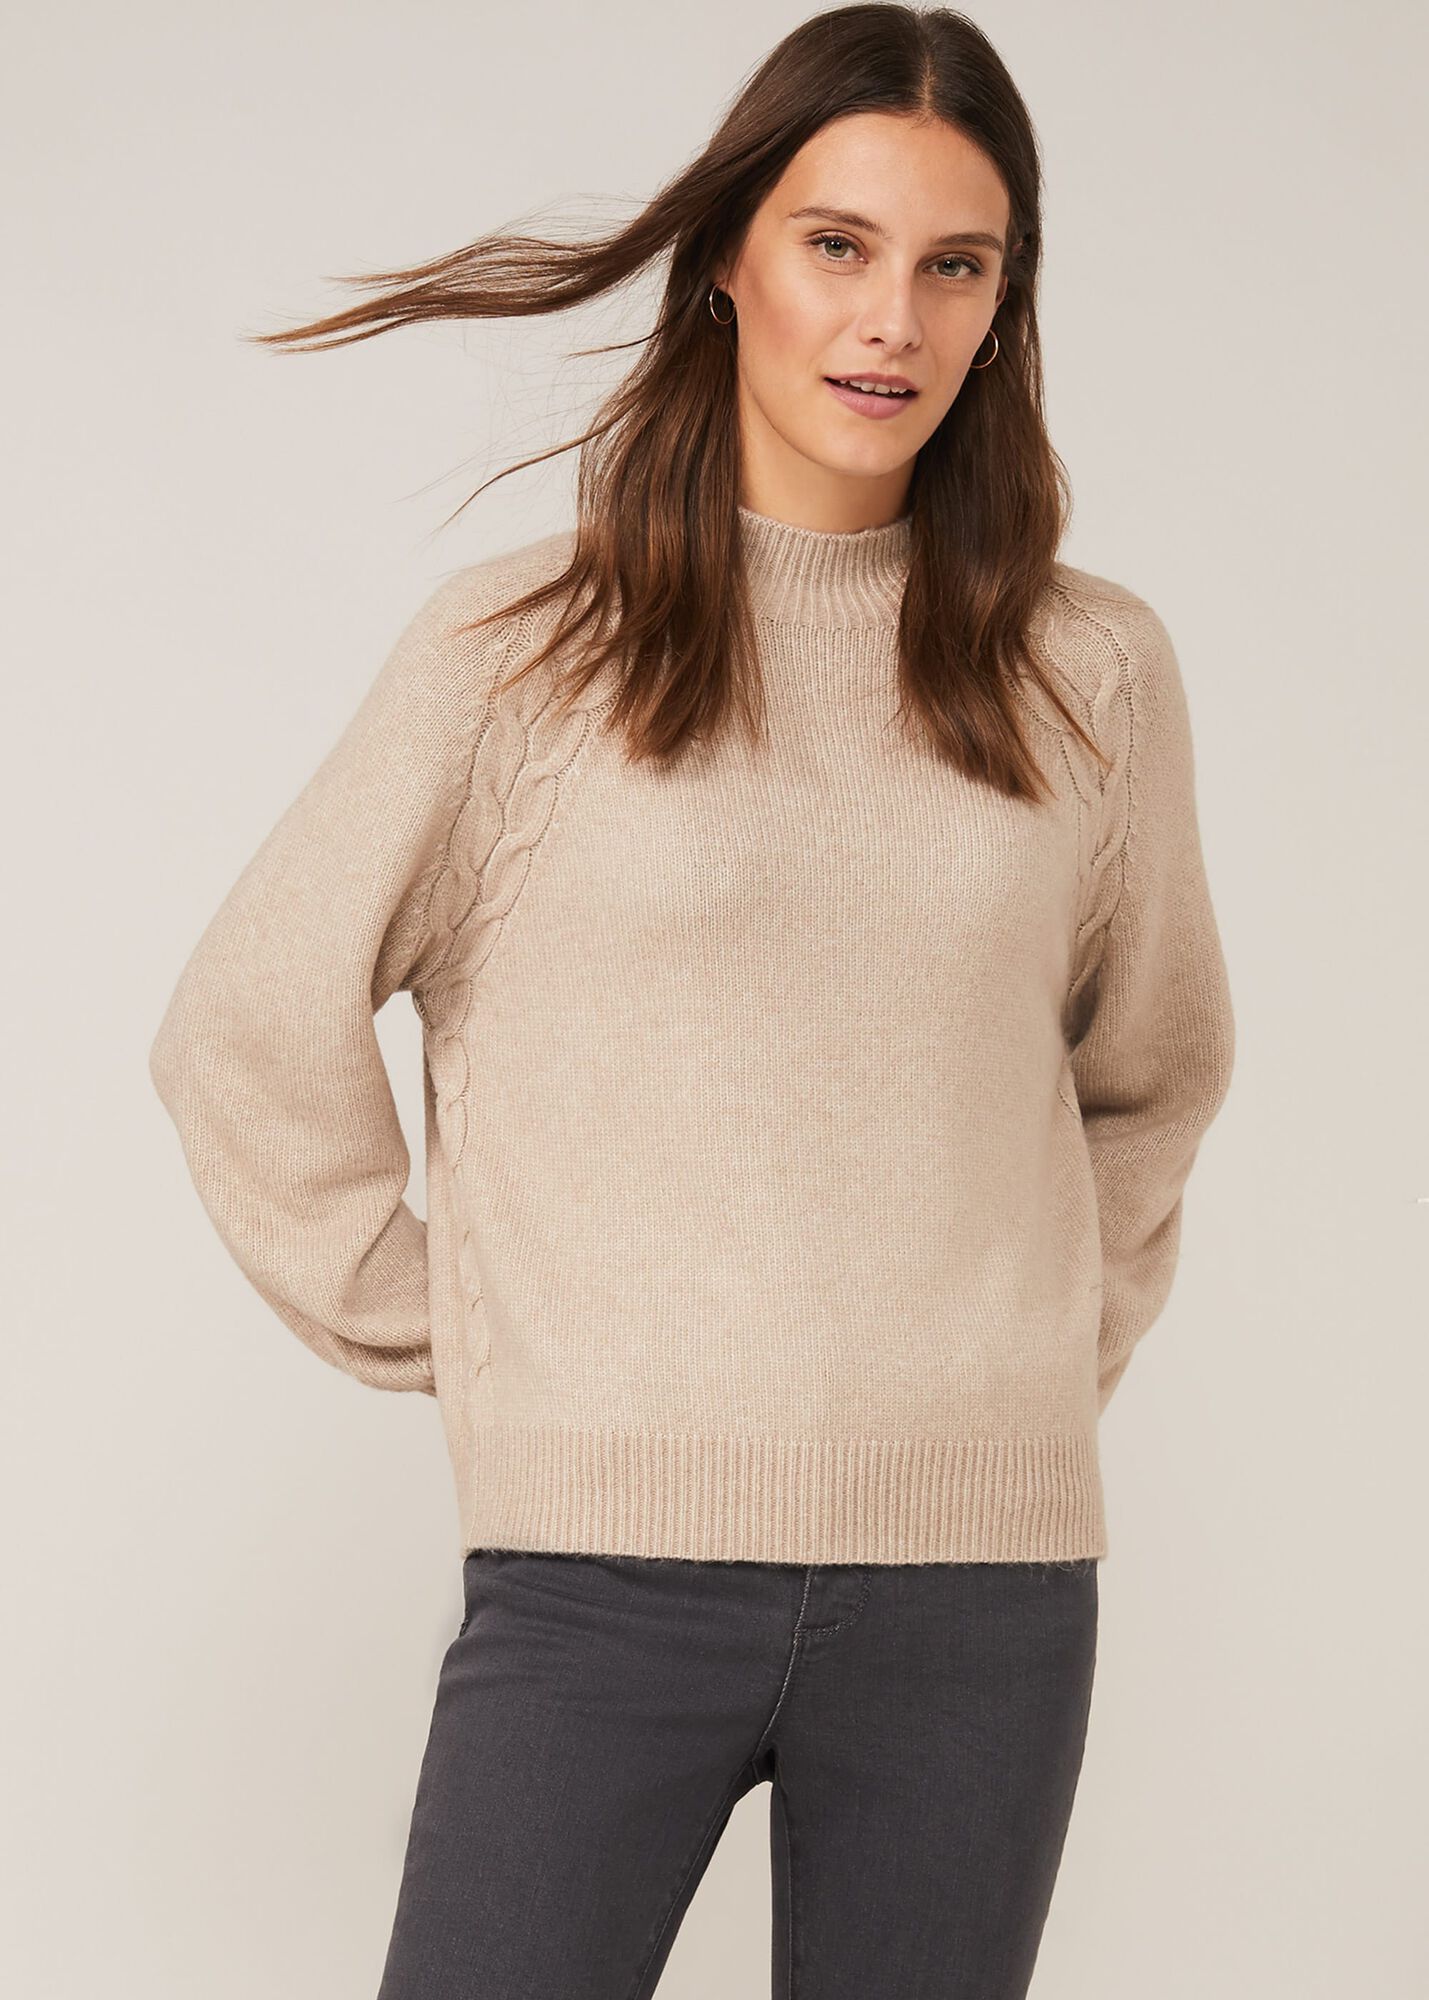 Amabel Cable Knit Jumper | Phase Eight